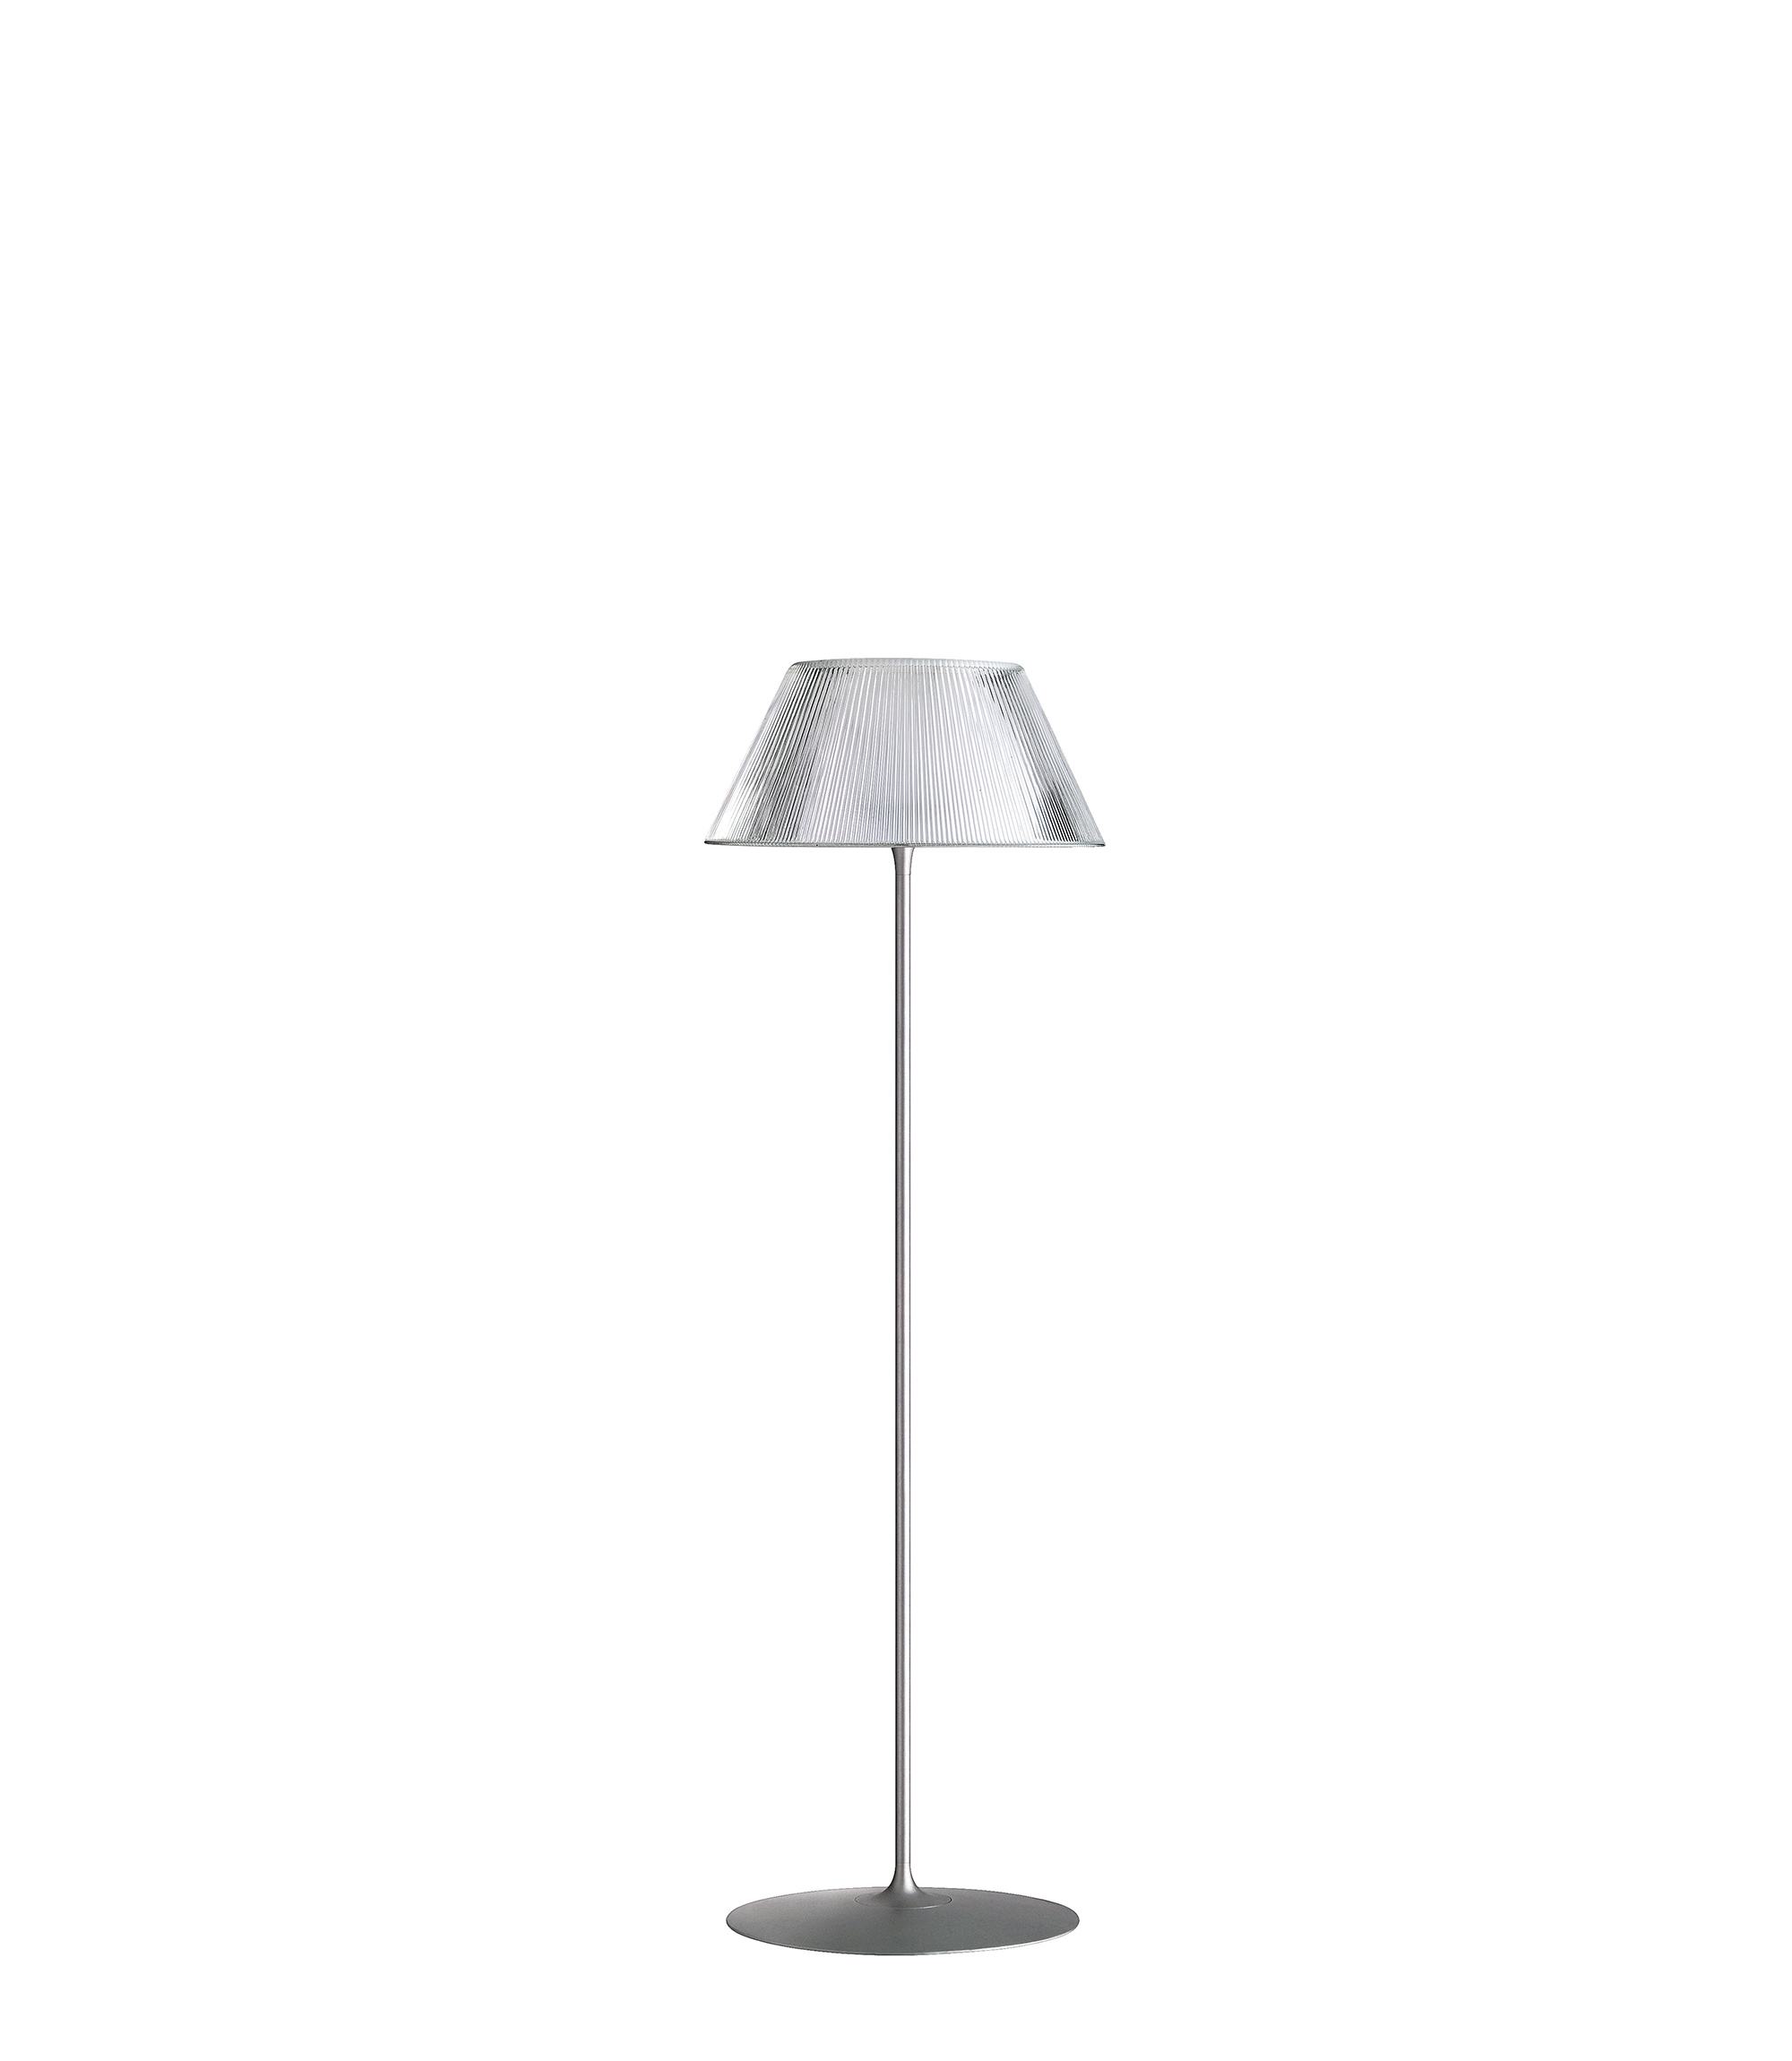 Romeo Moon Floor Lampe Boden Flos with dimensions 2000 X 2300